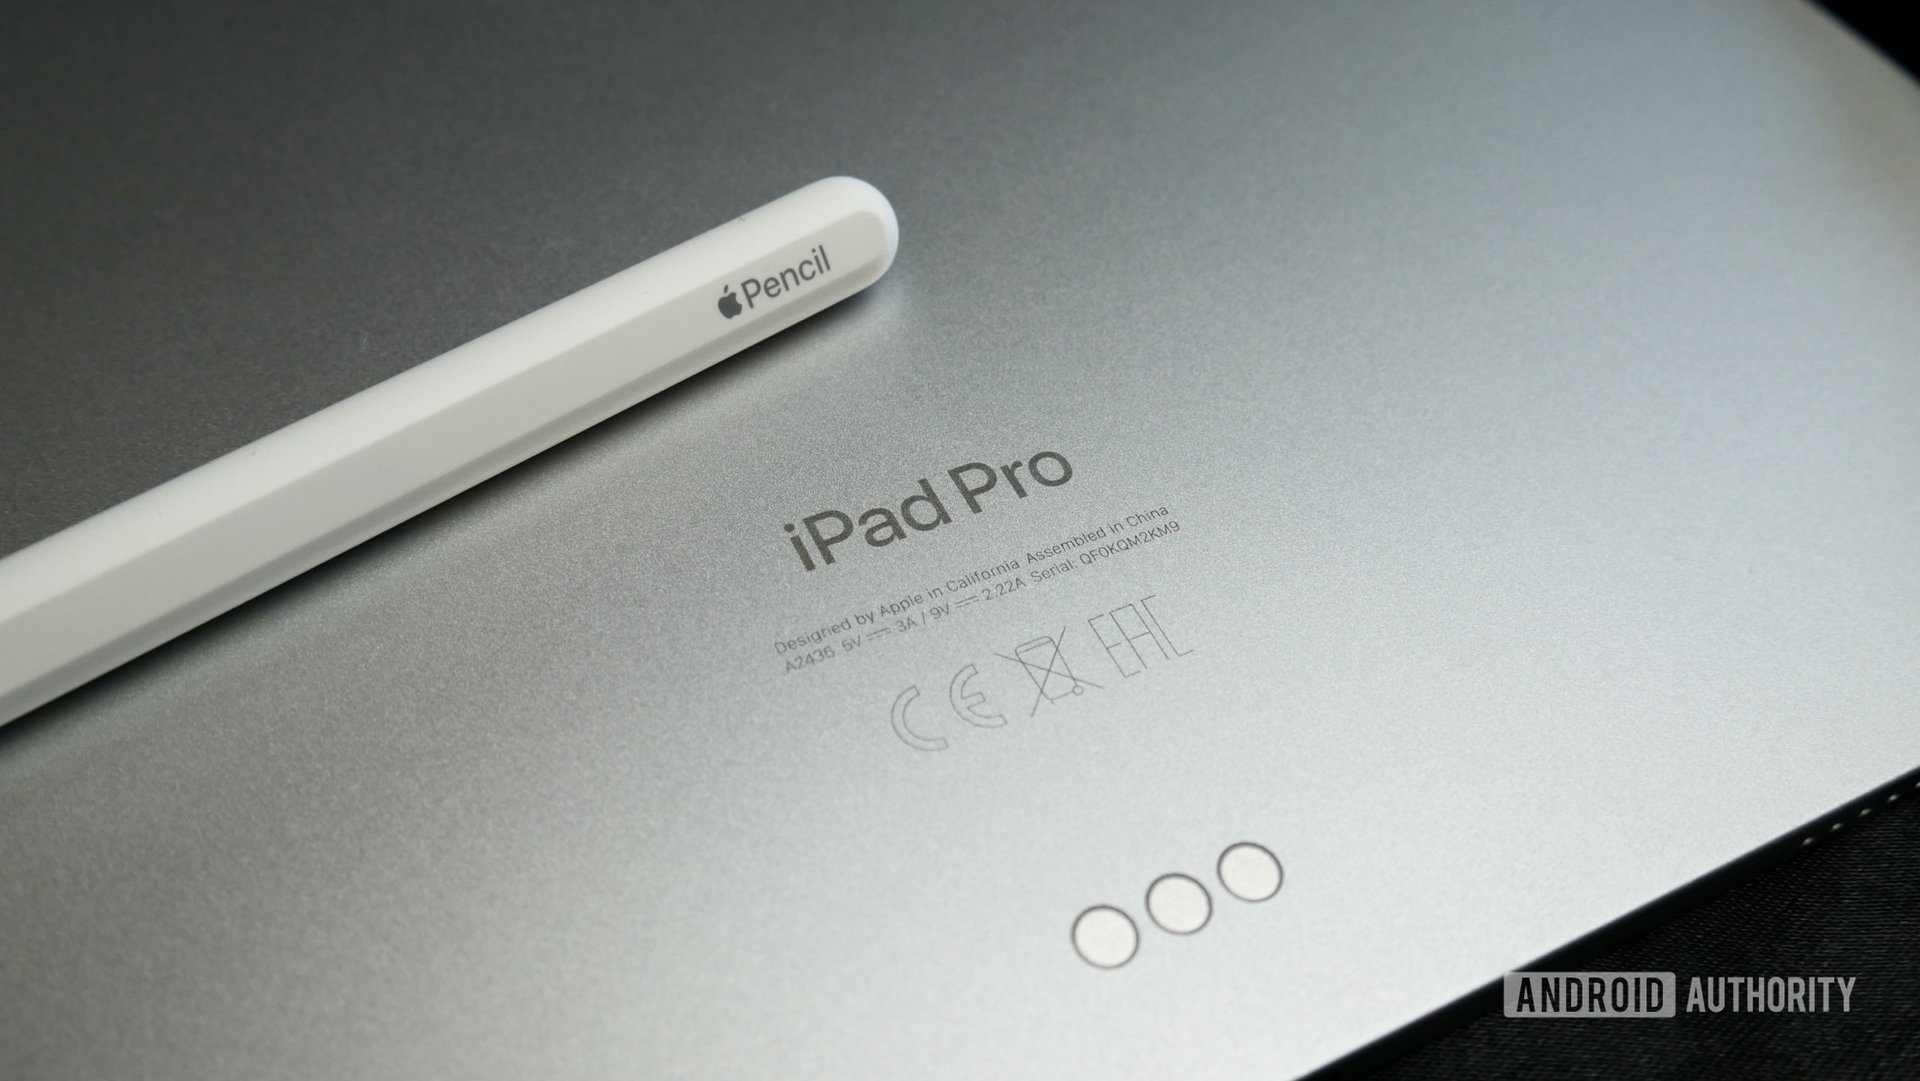 Apple Pencil 3 could outdo Samsung’s S Pen with key upgrades